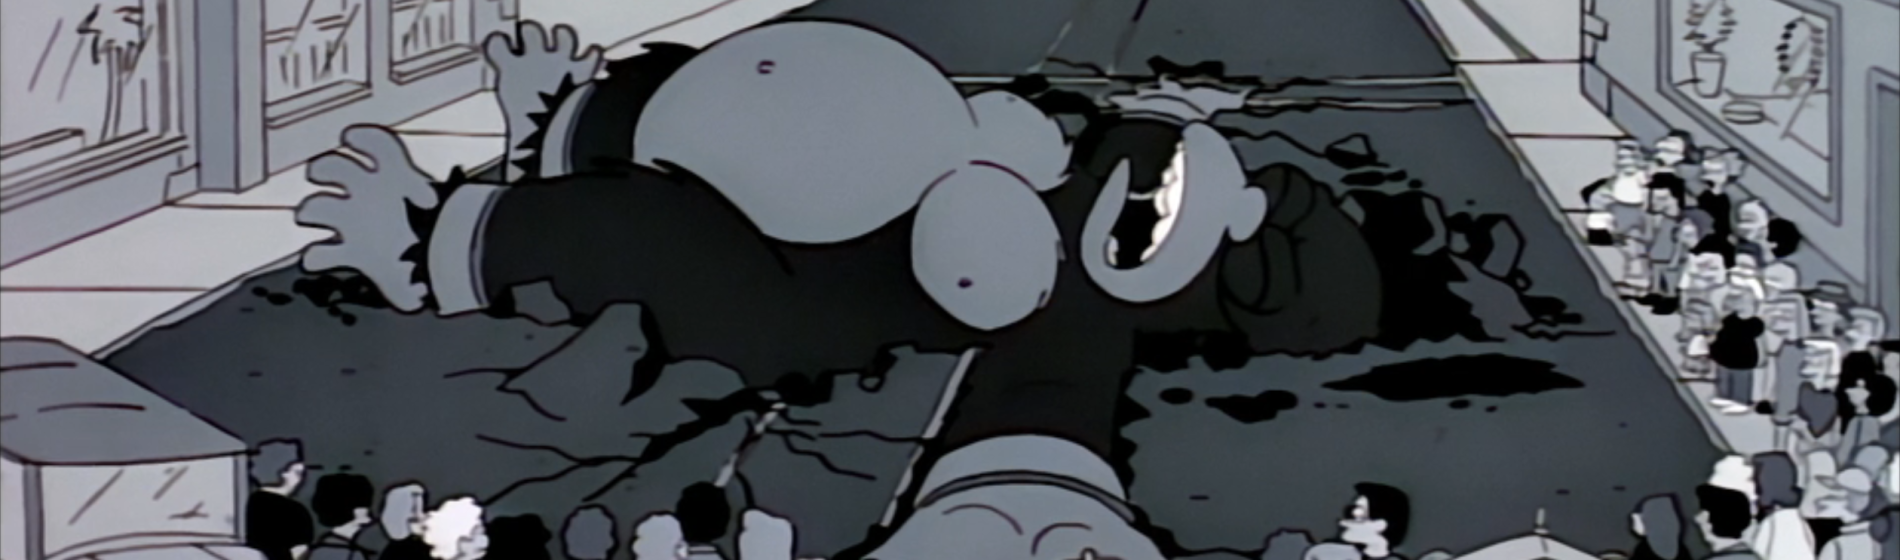 King Homer collapses in the street in Treehouse of Horror III, The Simpsons.